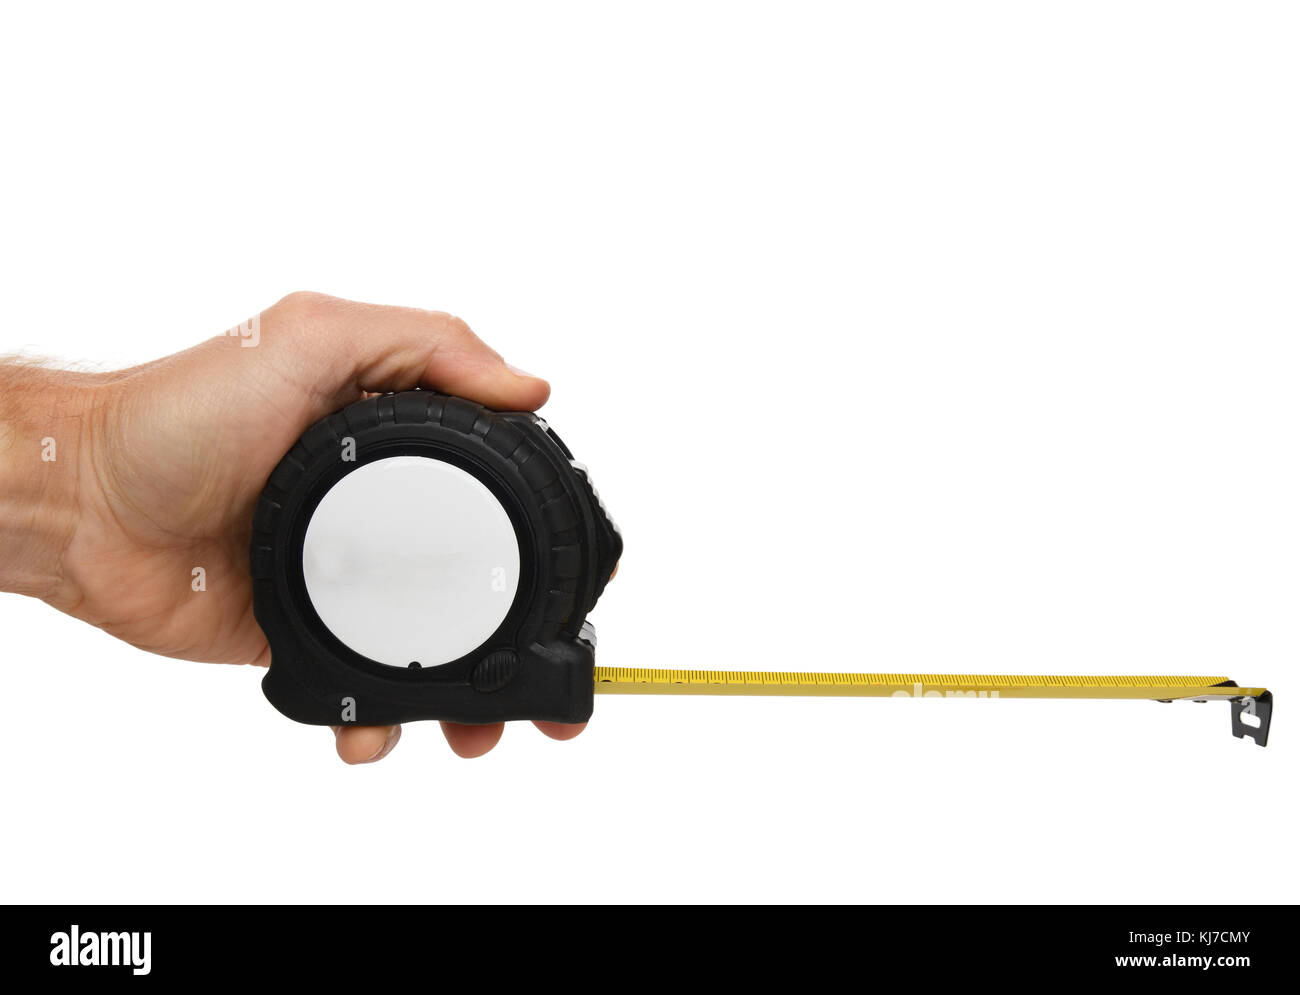 hand holding a tape measure isolated on a white background Stock Photo